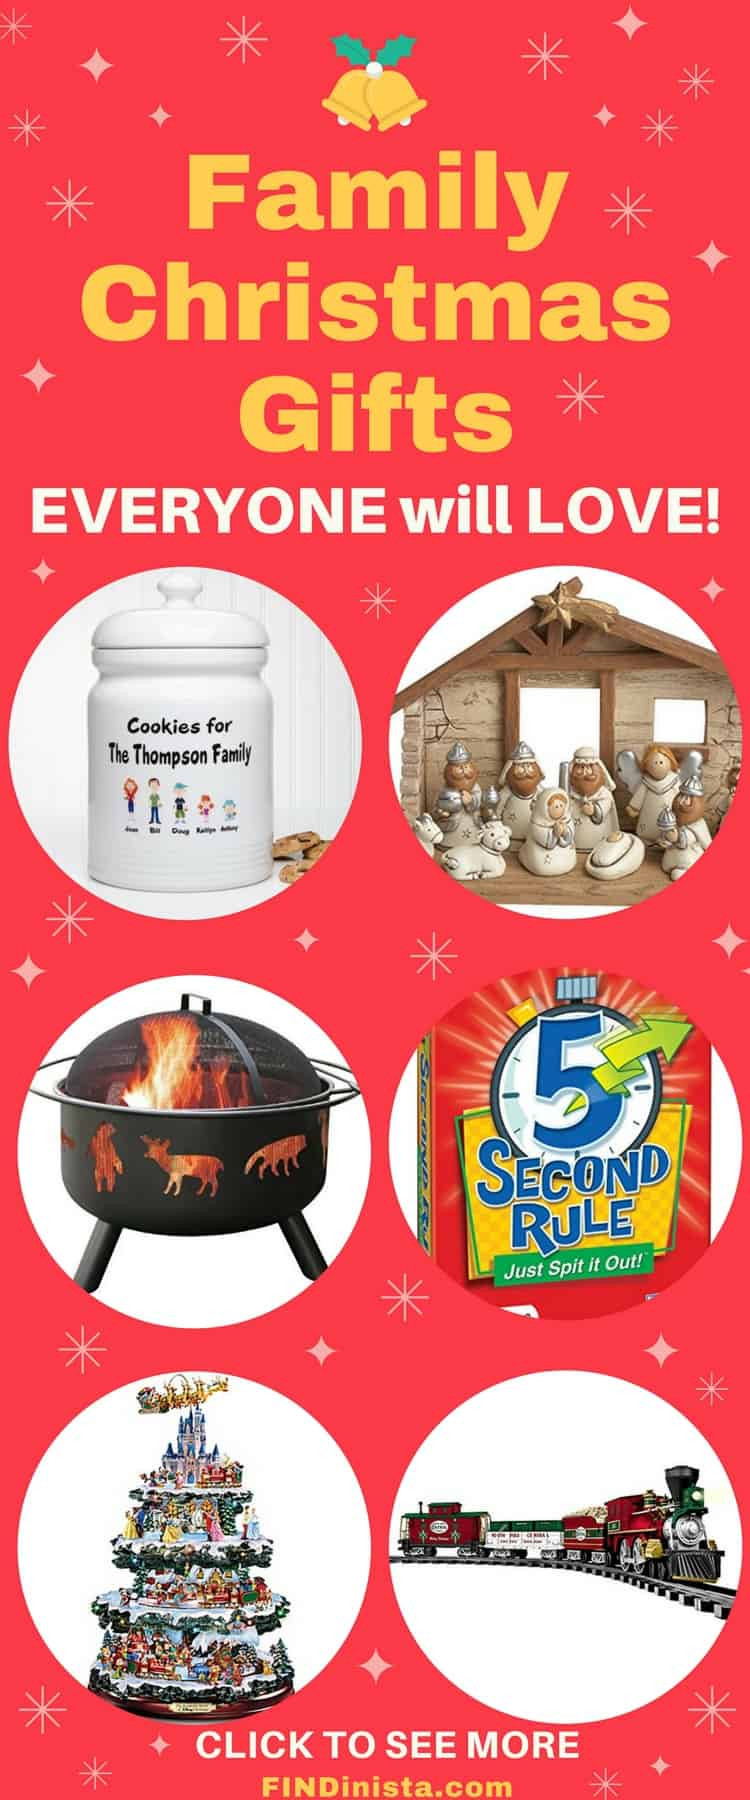 Christmas Gift Ideas For The Whole Family
 Best Family Gift Ideas for Christmas Fun Gifts the Whole